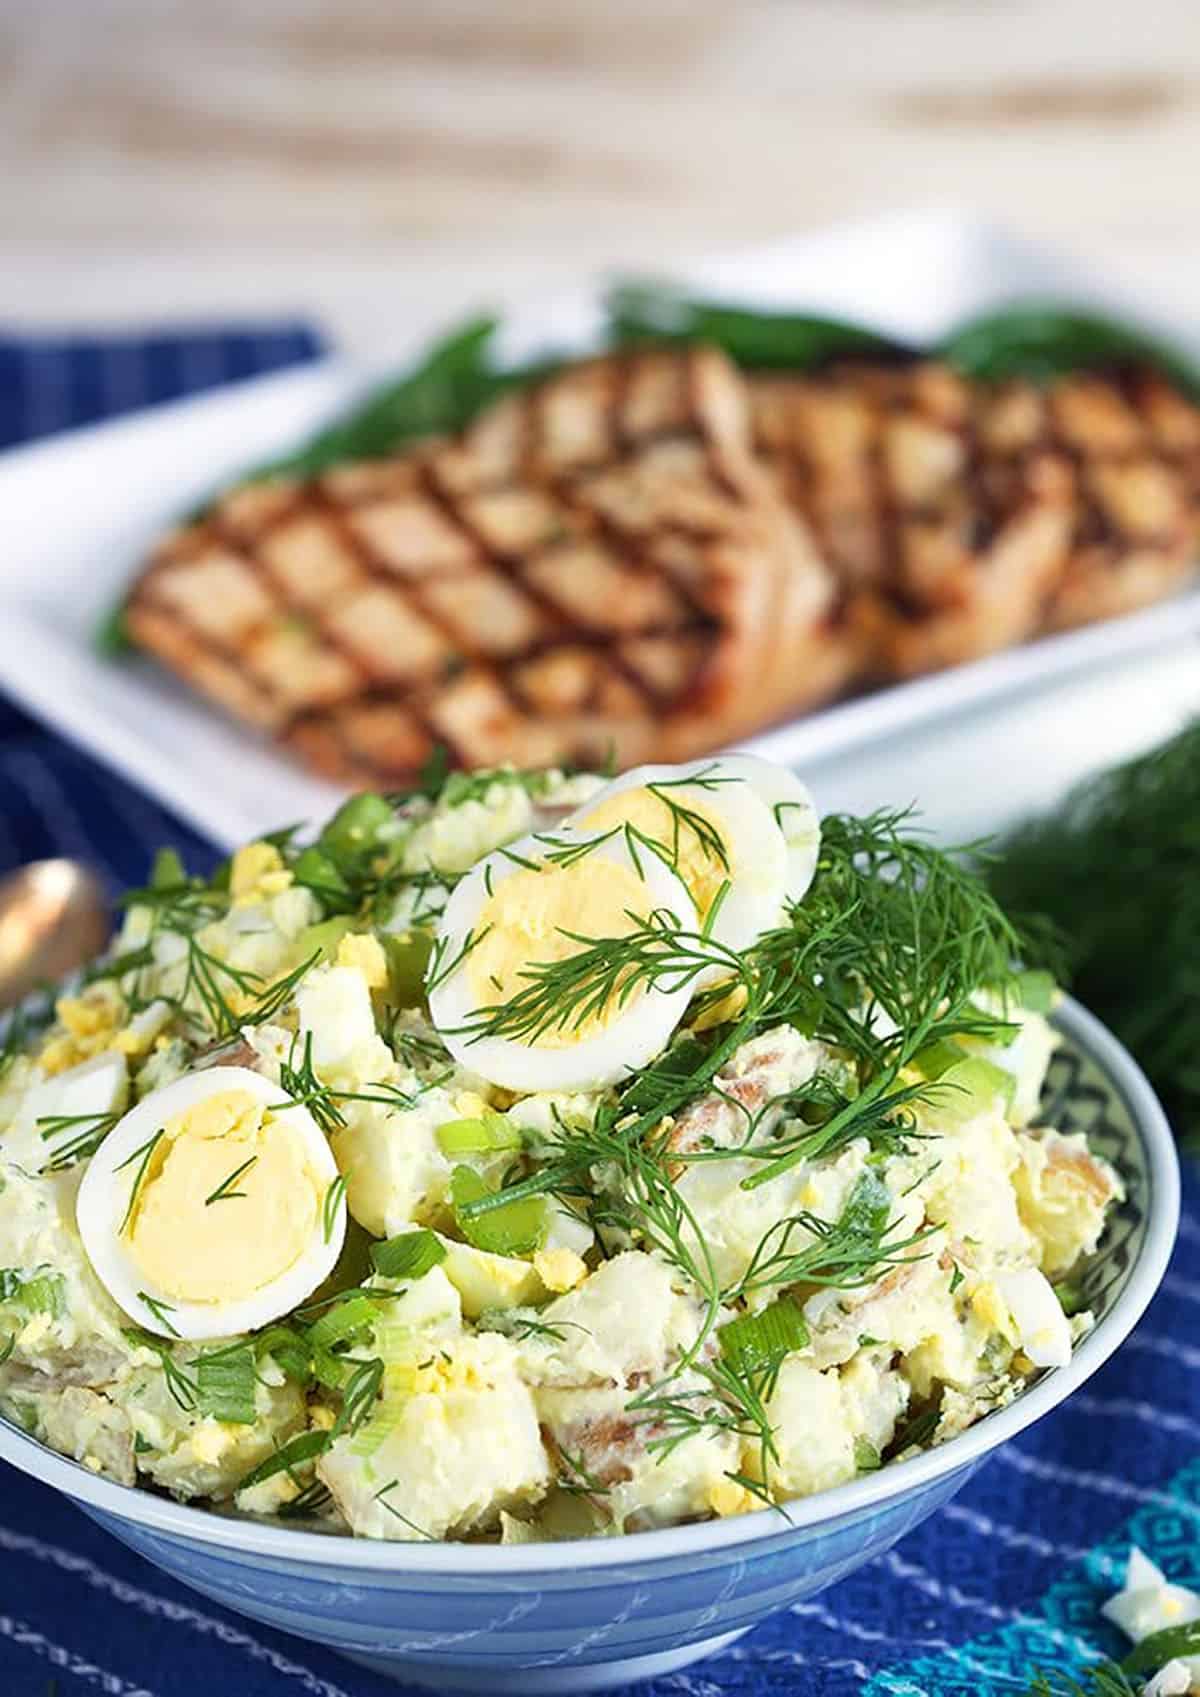 Potato Salad with egg and dill in a blue and white bowl.